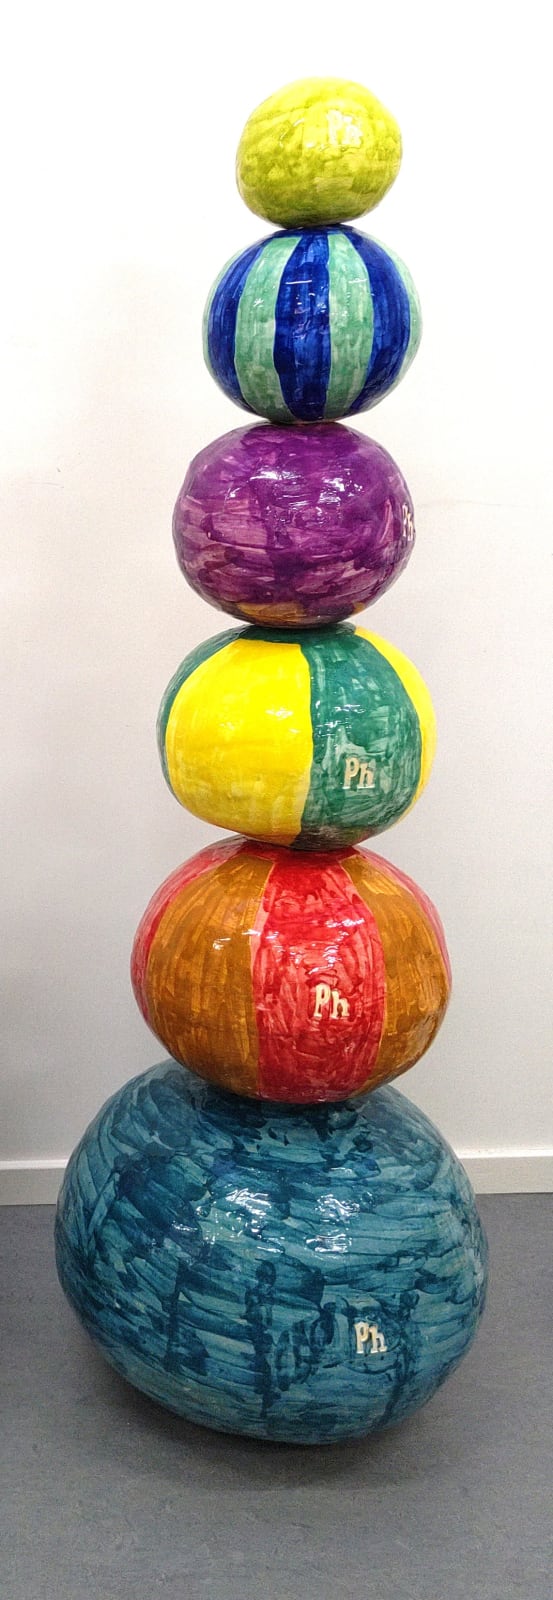 Polly Huyghe, Beach Ball Totem (large), 2021 - 2022